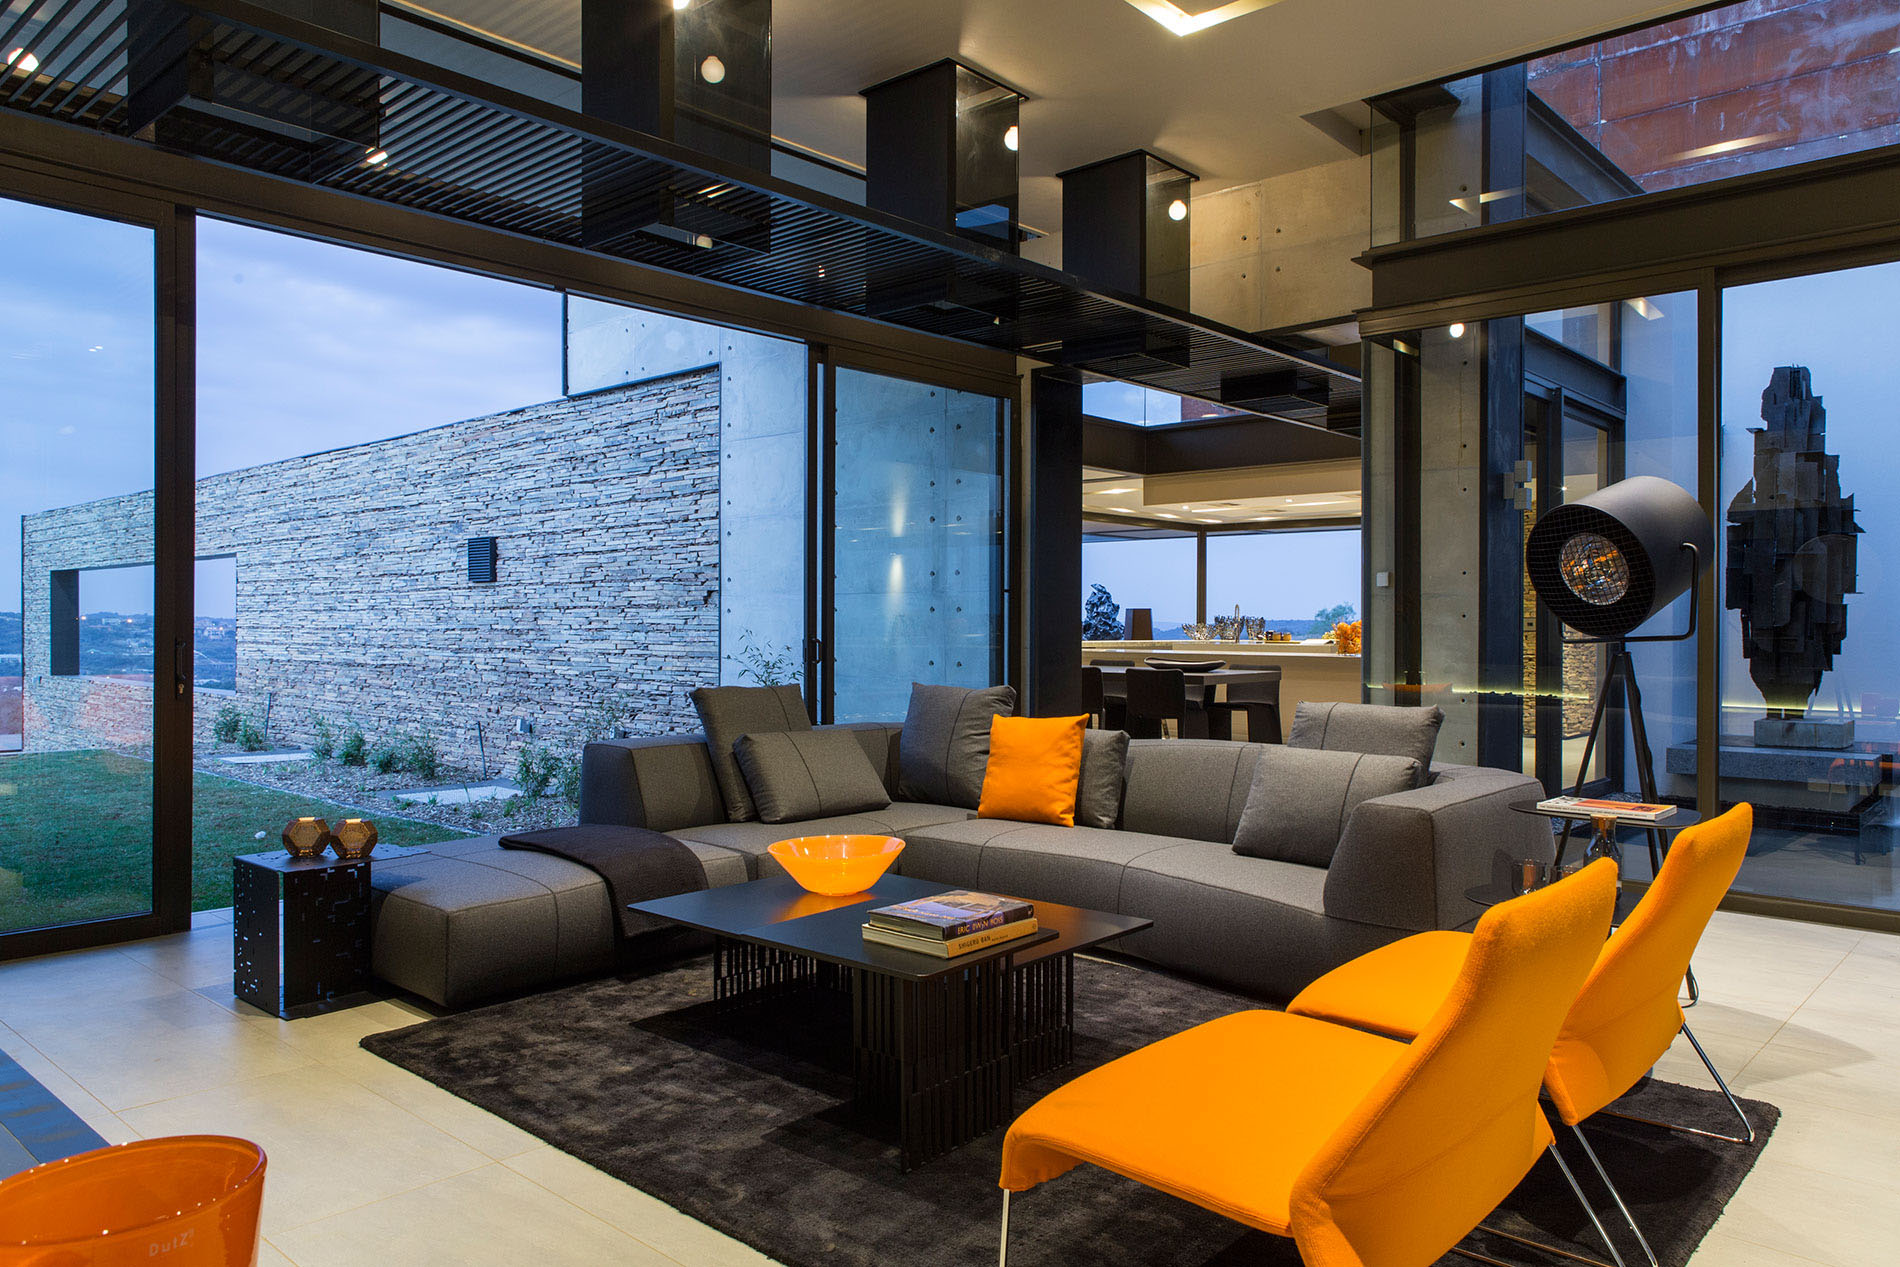 Living Room Of Brilliant Living Room Space Design Of House Boz By Nico Van Der Meulen Architects With Black Colored Rug Carpet Dream Homes Spacious And Concrete Contemporary House With Glass And Steel Elements